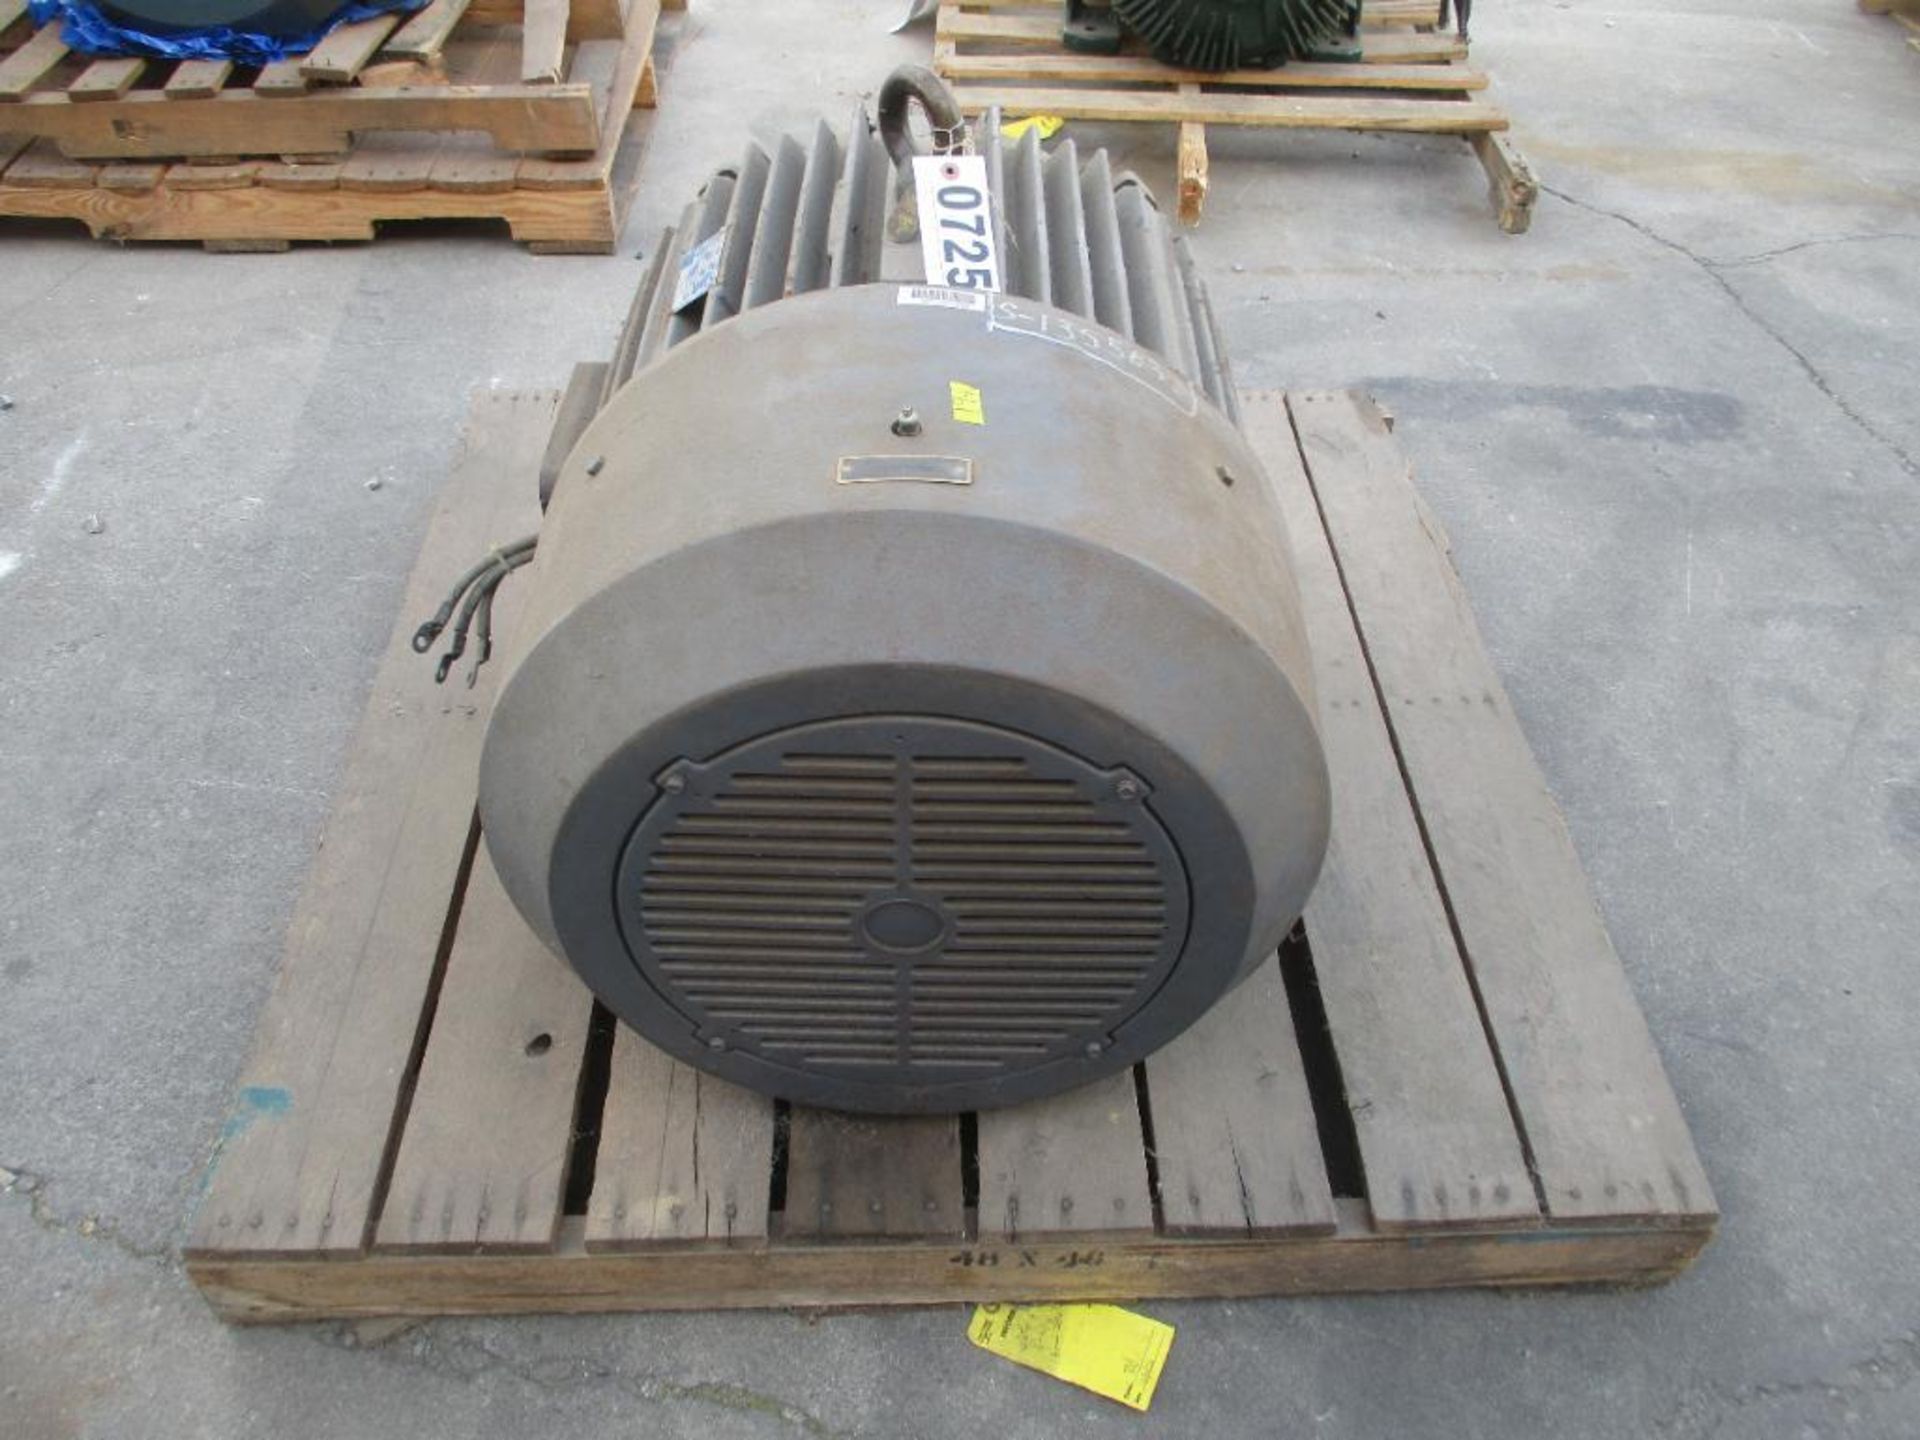 MAGNETEK 3 PHASE 125HP 1780RPM 444T FRAME A/C MOTOR P/N N/A 1754# LBS (THIS LOT IS FOB KNOXVILLE TN) - Image 4 of 5